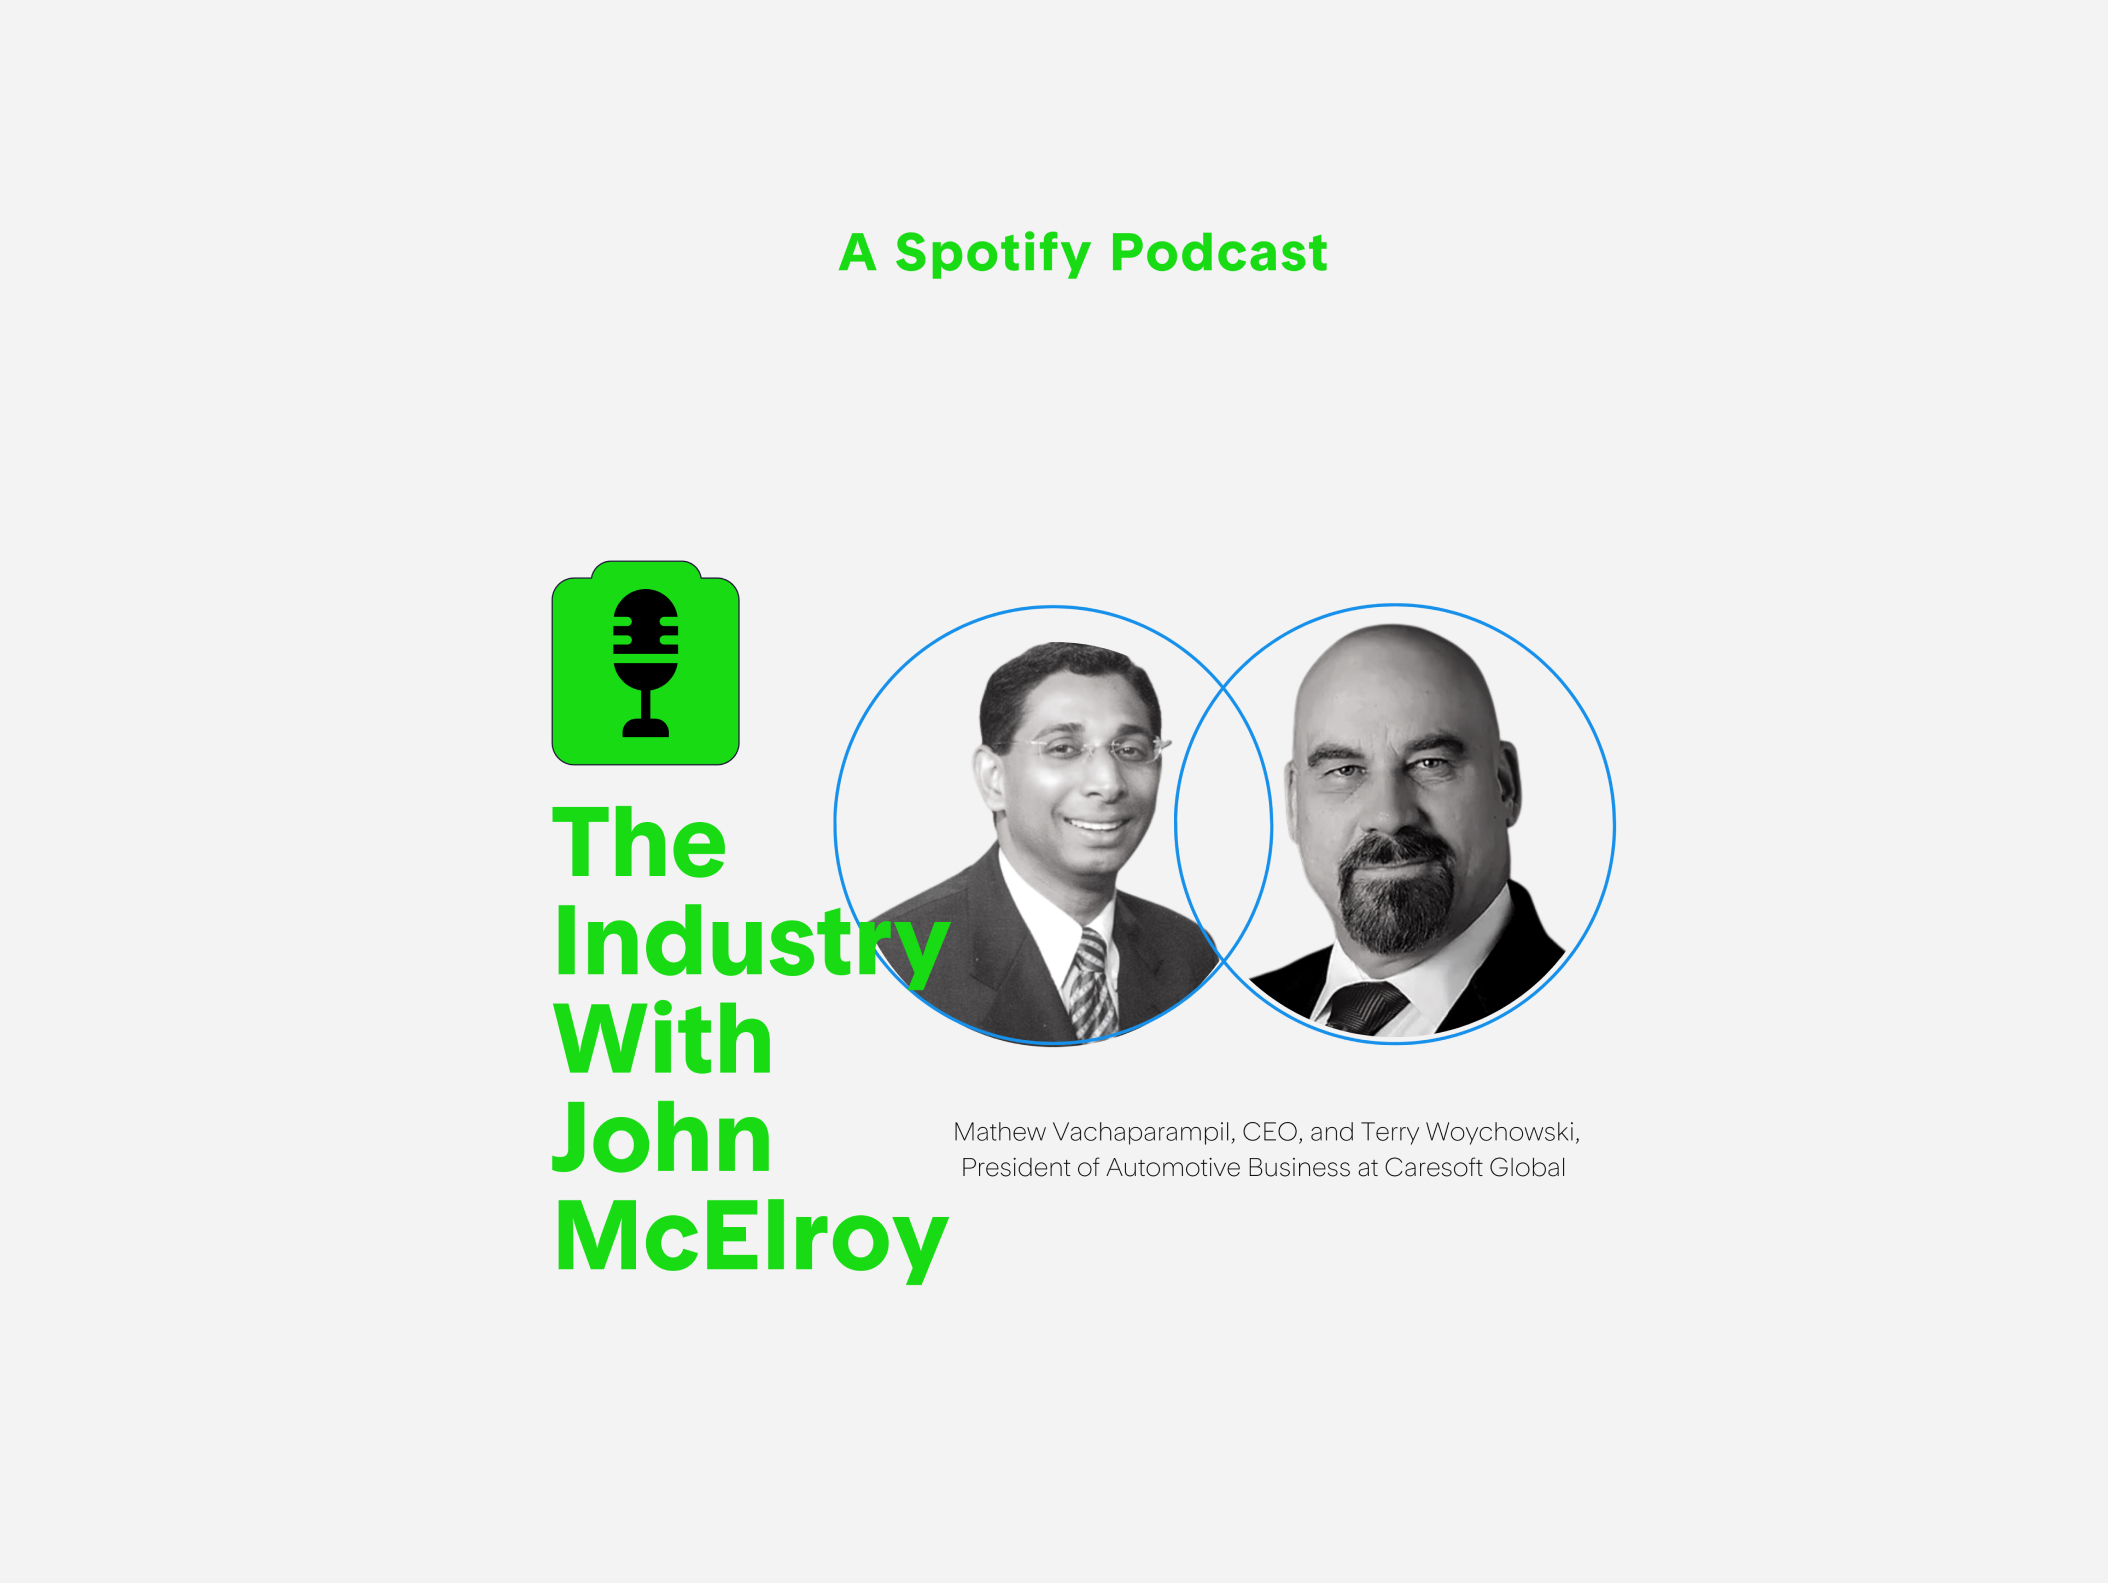 Spotify podcast The industry with John McElroy